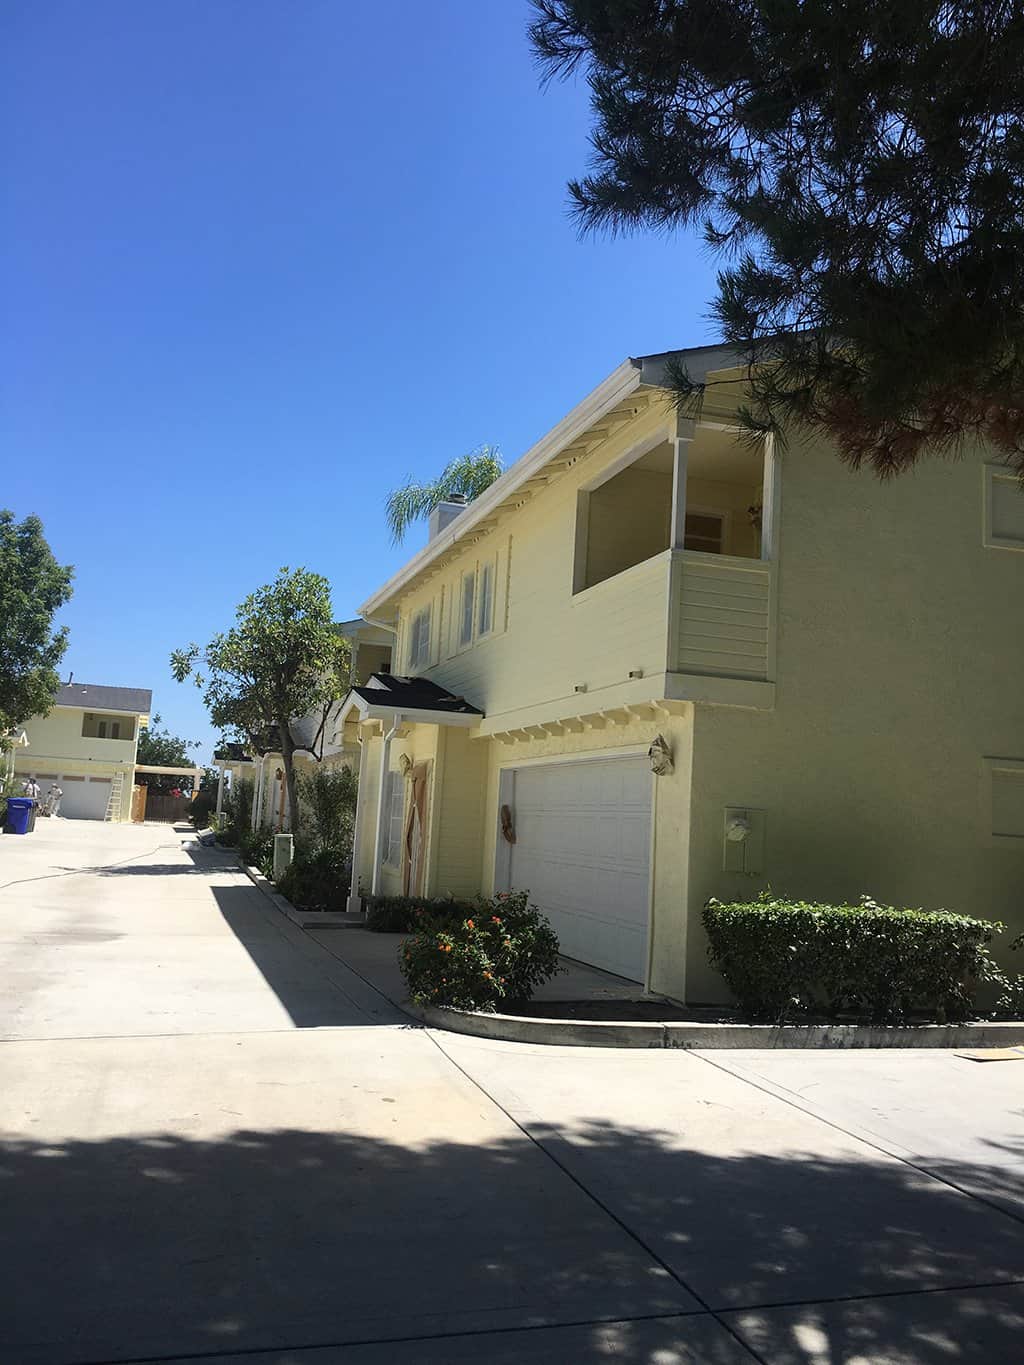 San Diego Painting HOA Project - We offer you a complete line of professional interior and exterior painting services for your HOA. Procoat Painting provides great value with every project.